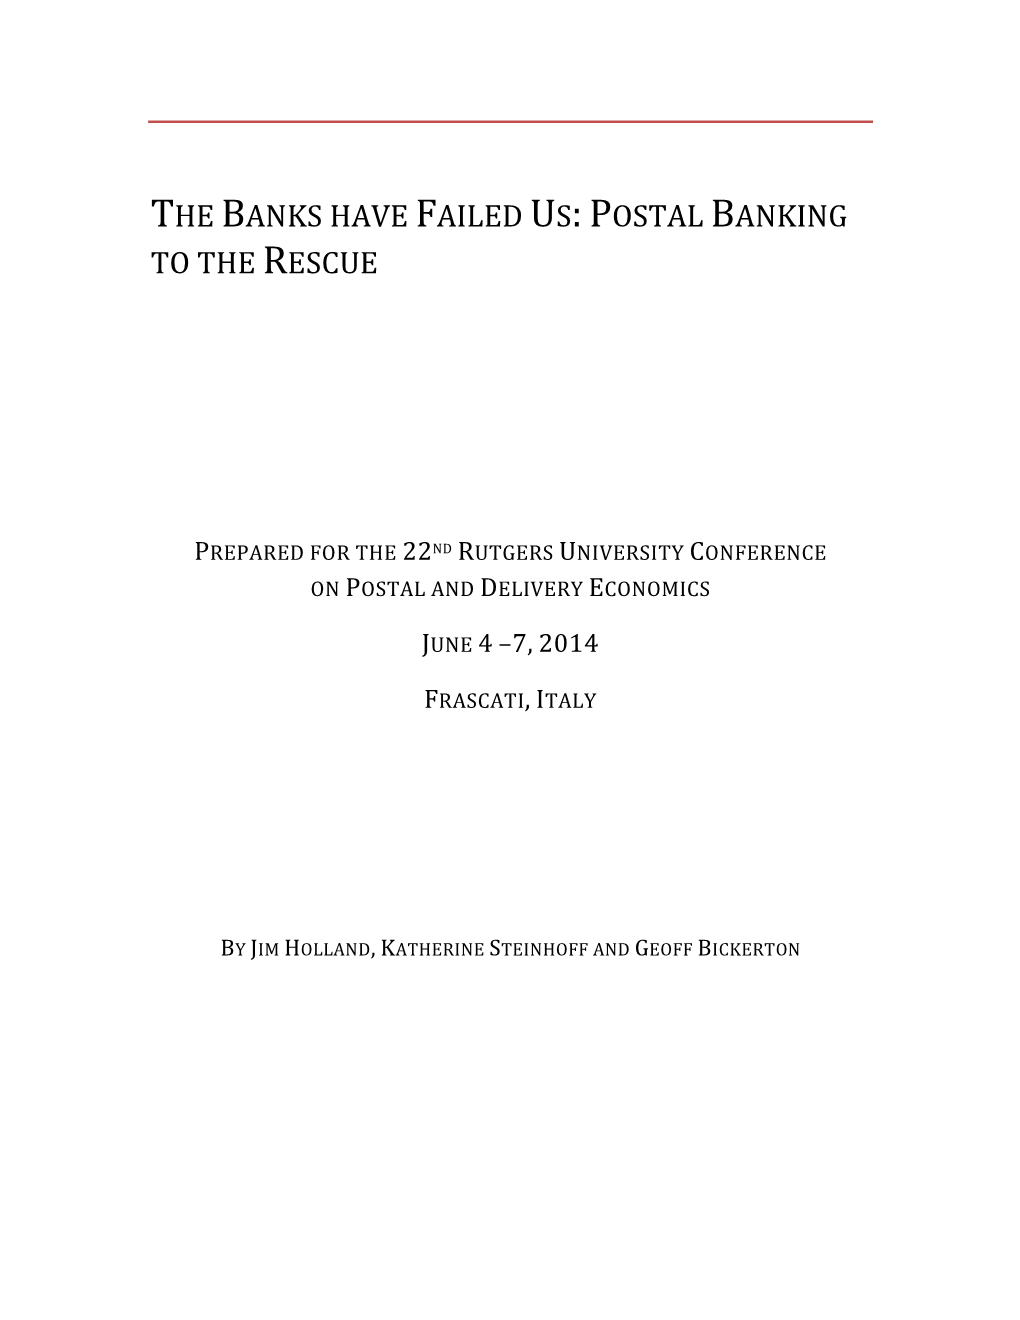 The Banks Have Failed Us: Postal Banking to the Rescue (Pdf)